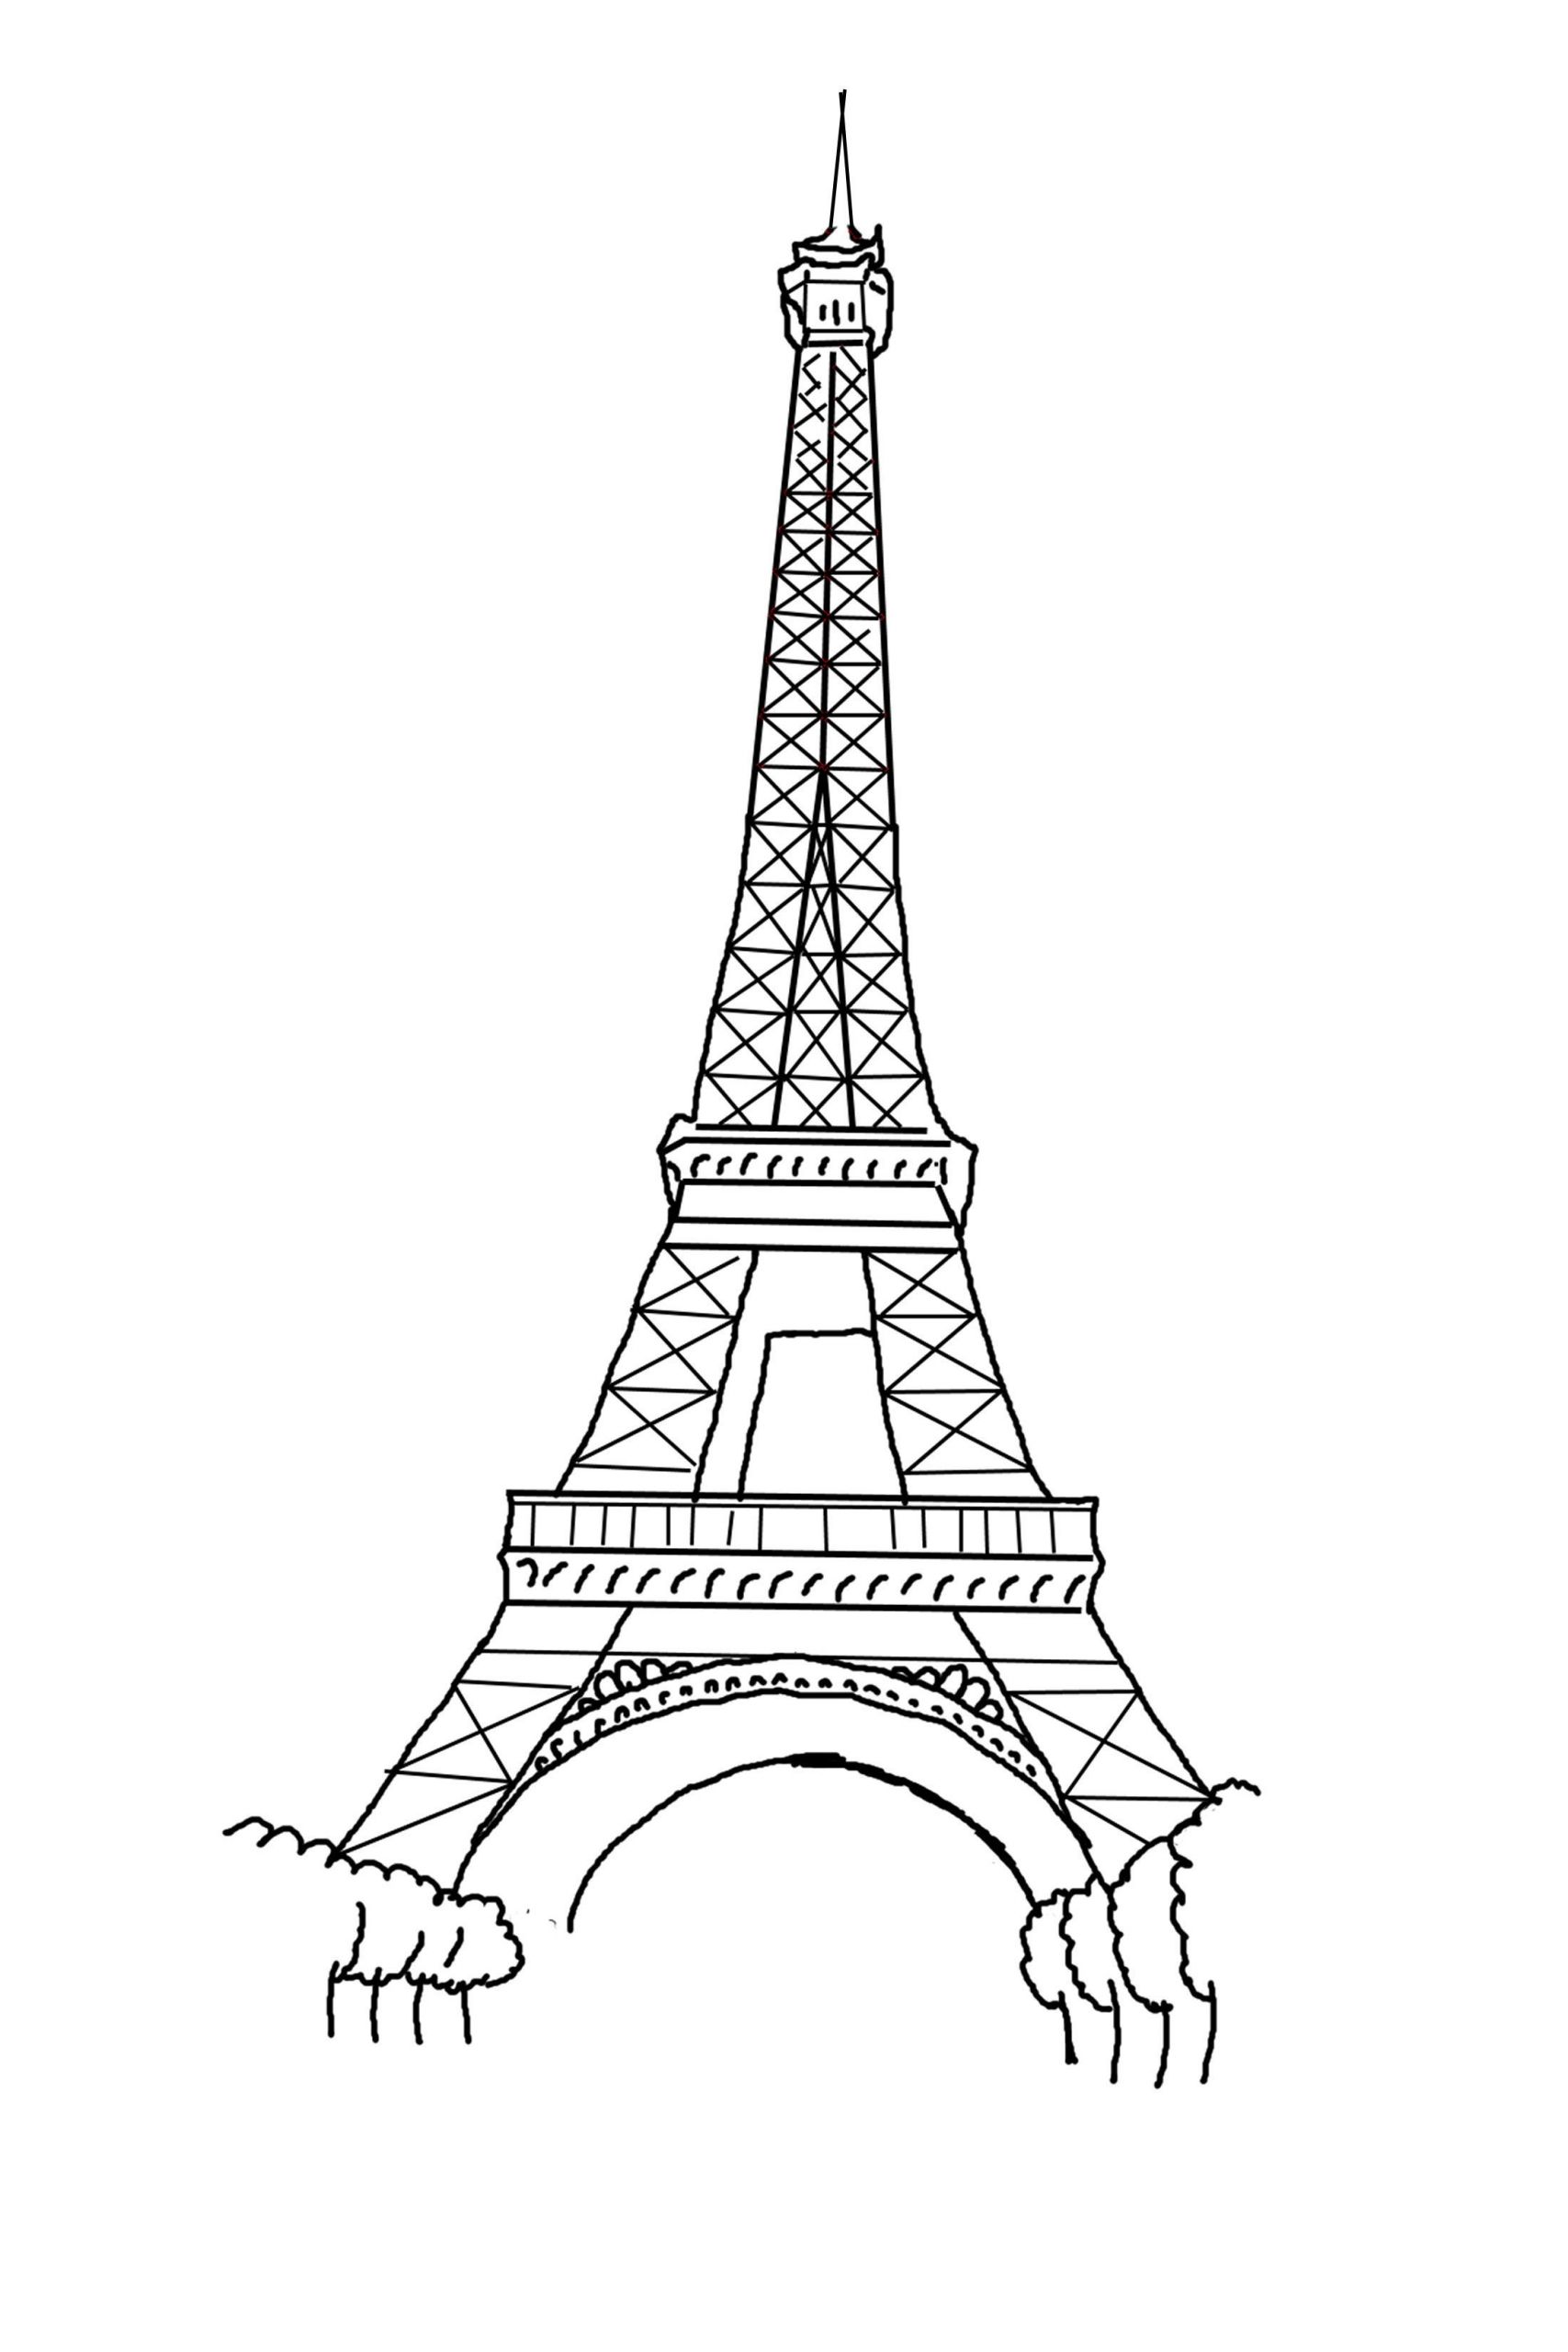 Paris Coloring Pages For Kids
 Torre Eiffel Printable Related Keywords & Suggestions